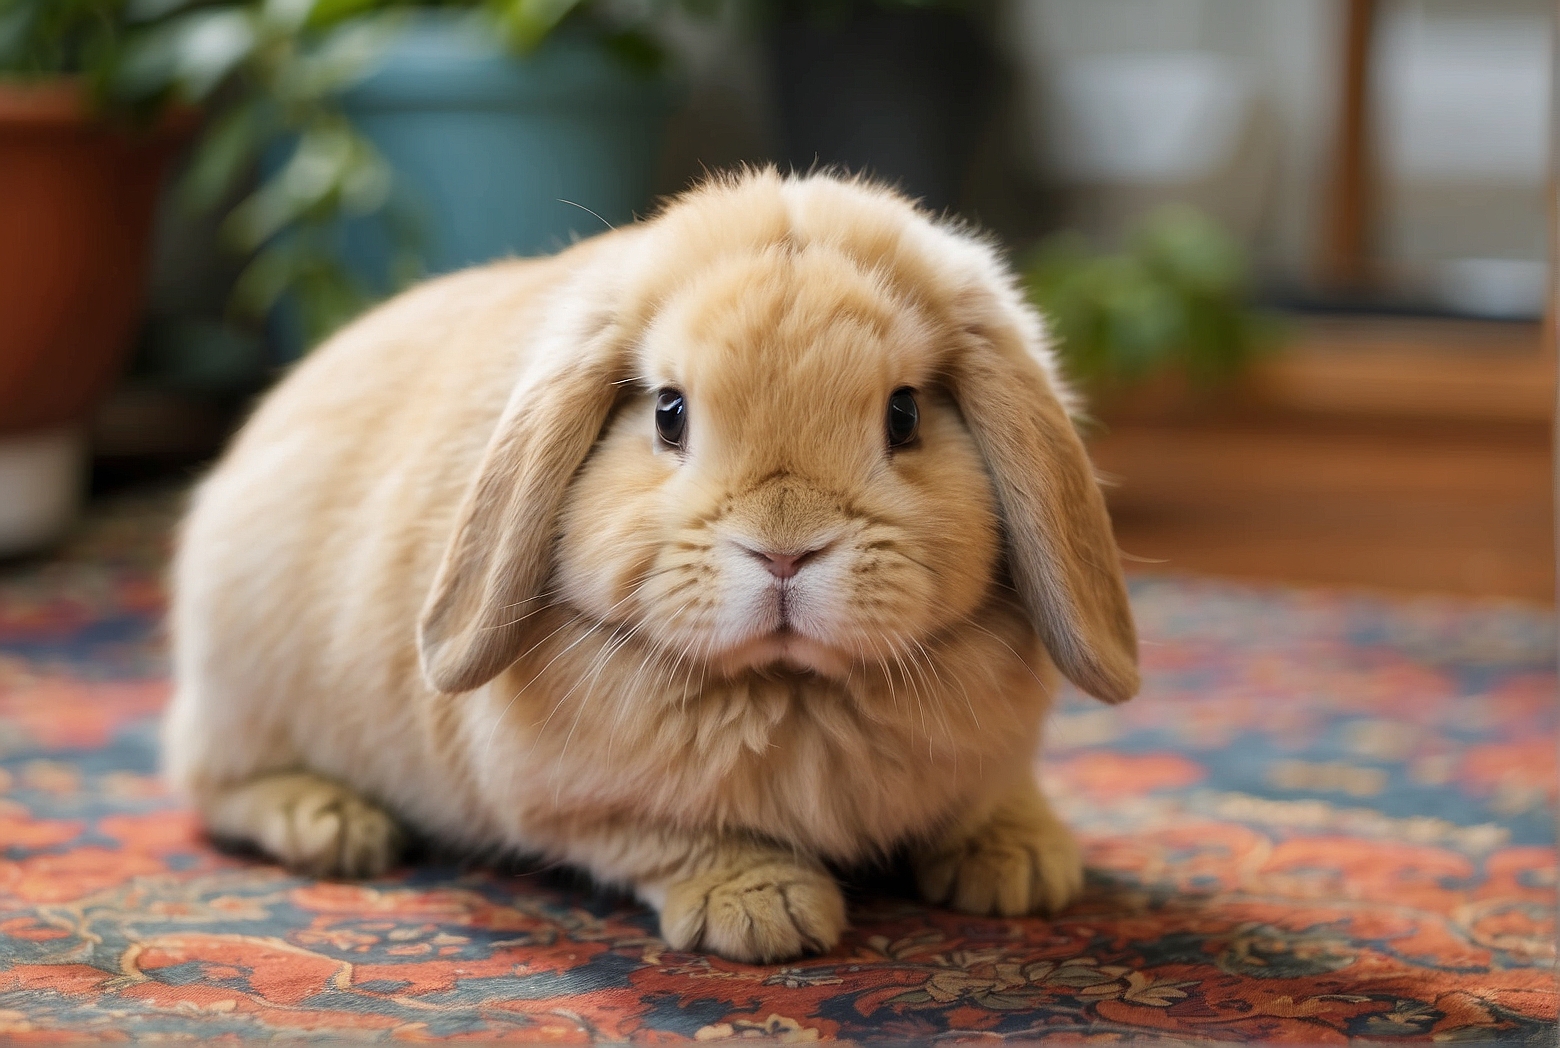 What is the average weight of Holland Lop rabbits?